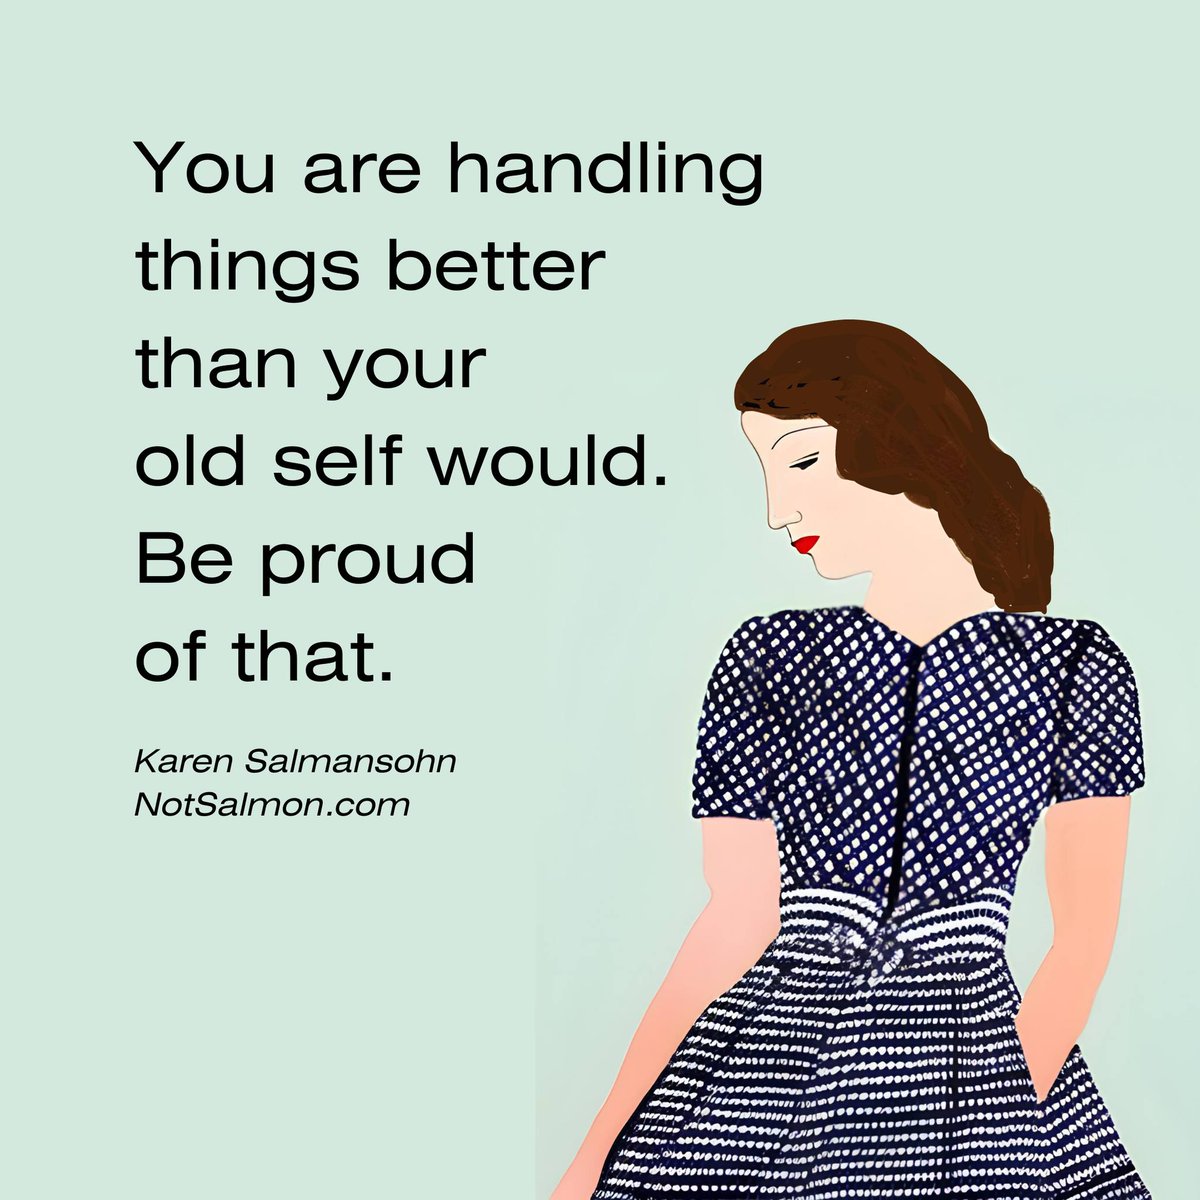 You are handling things better than your old self would. Be proud of that. - Karen Salmansohn ~ #Inspiration